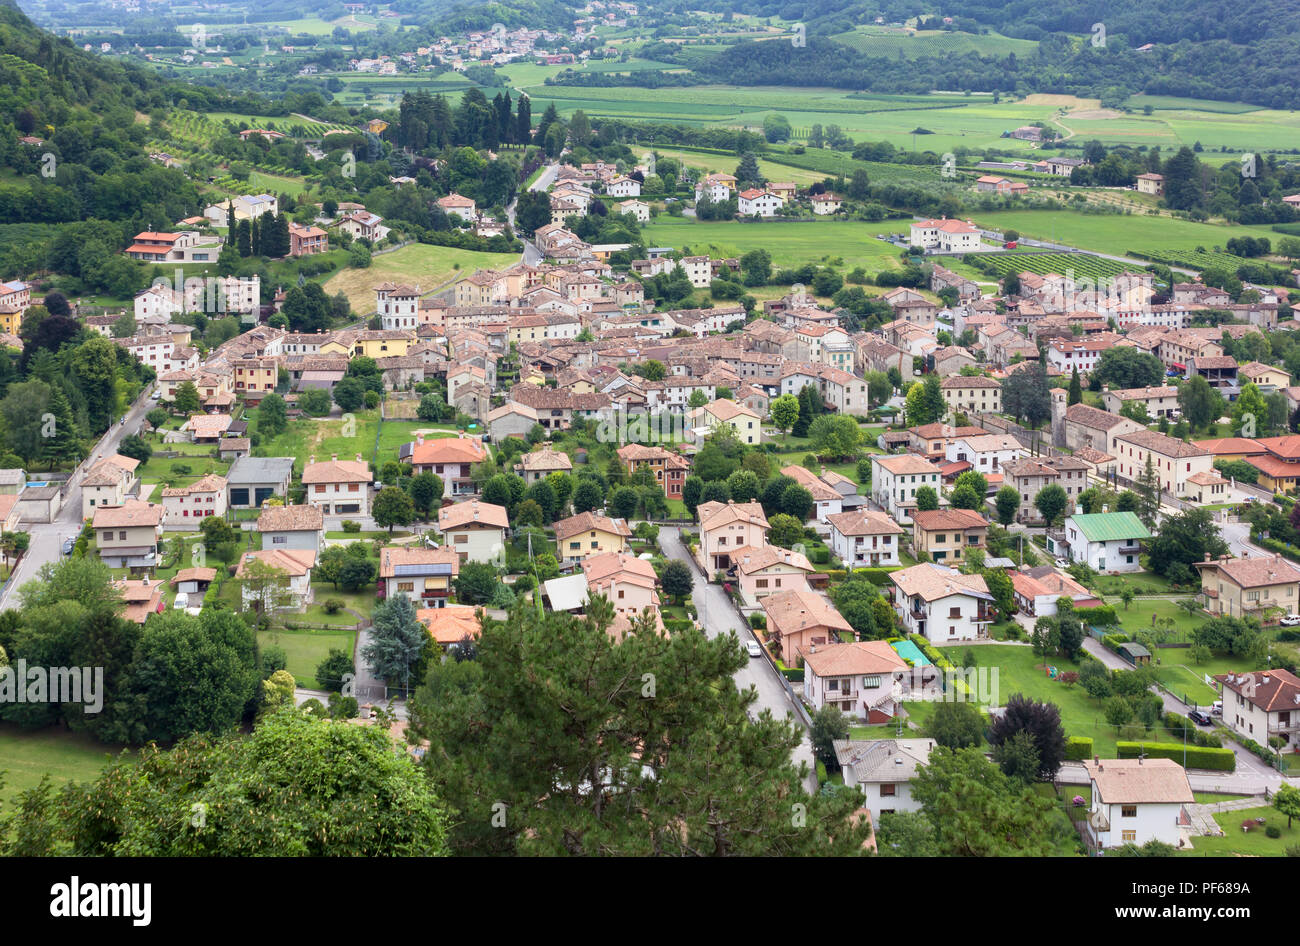 Treviso Aerial View High Resolution Stock Photography and Images - Alamy